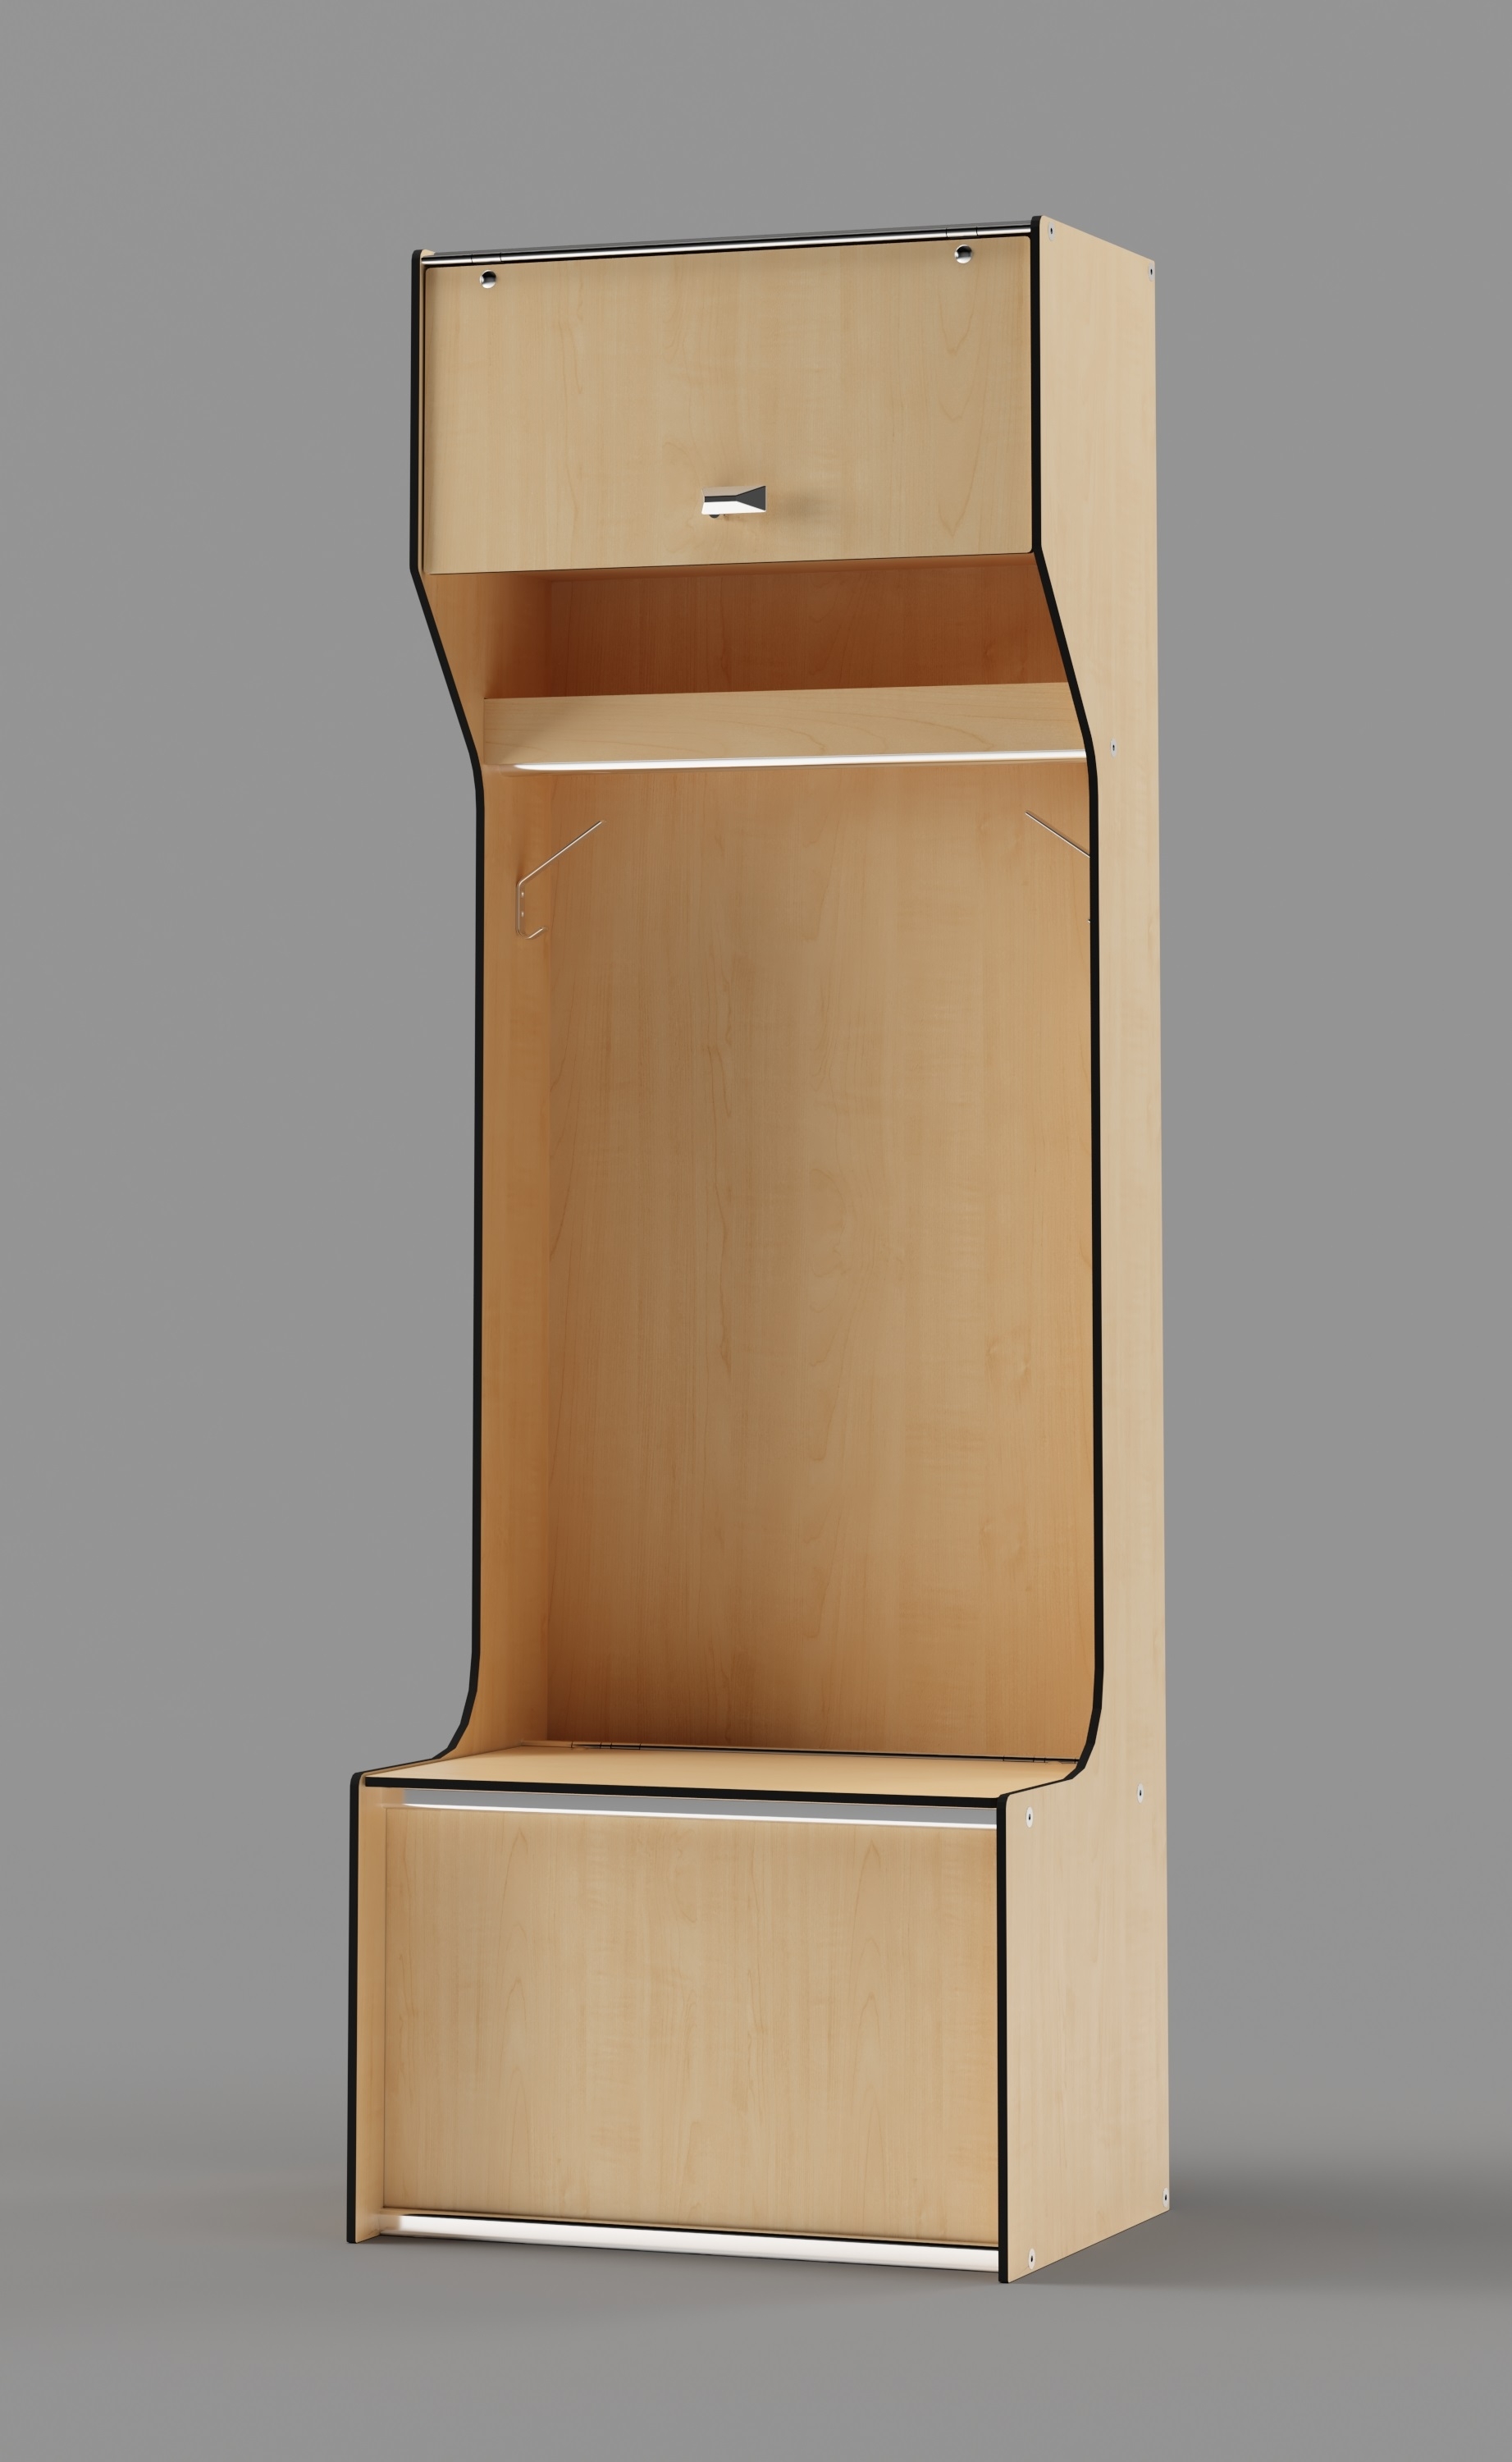 Model: Tradition 80"H with Extra Shelf